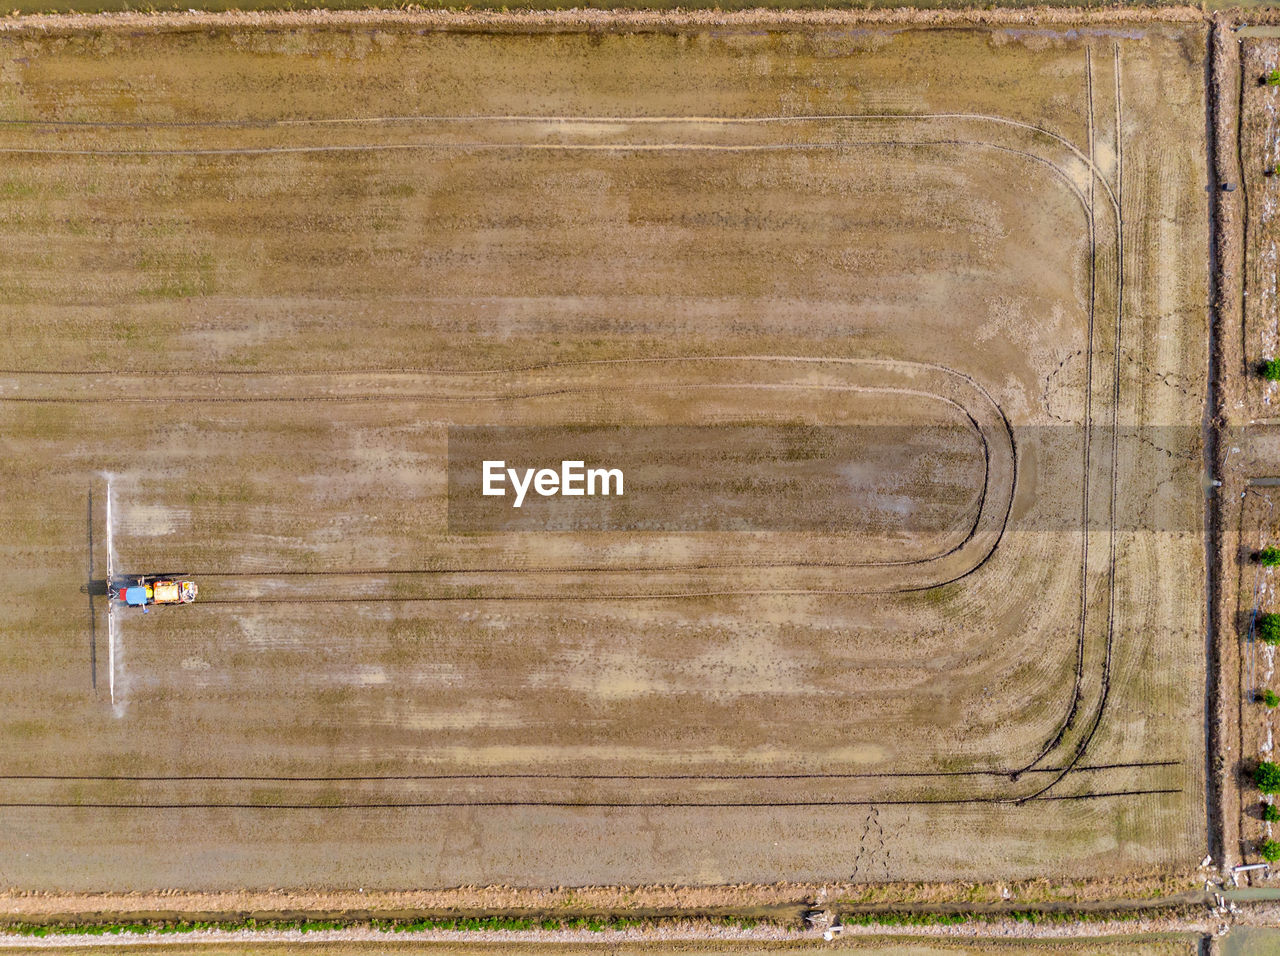 Aerial view of agricultural machinery on farm